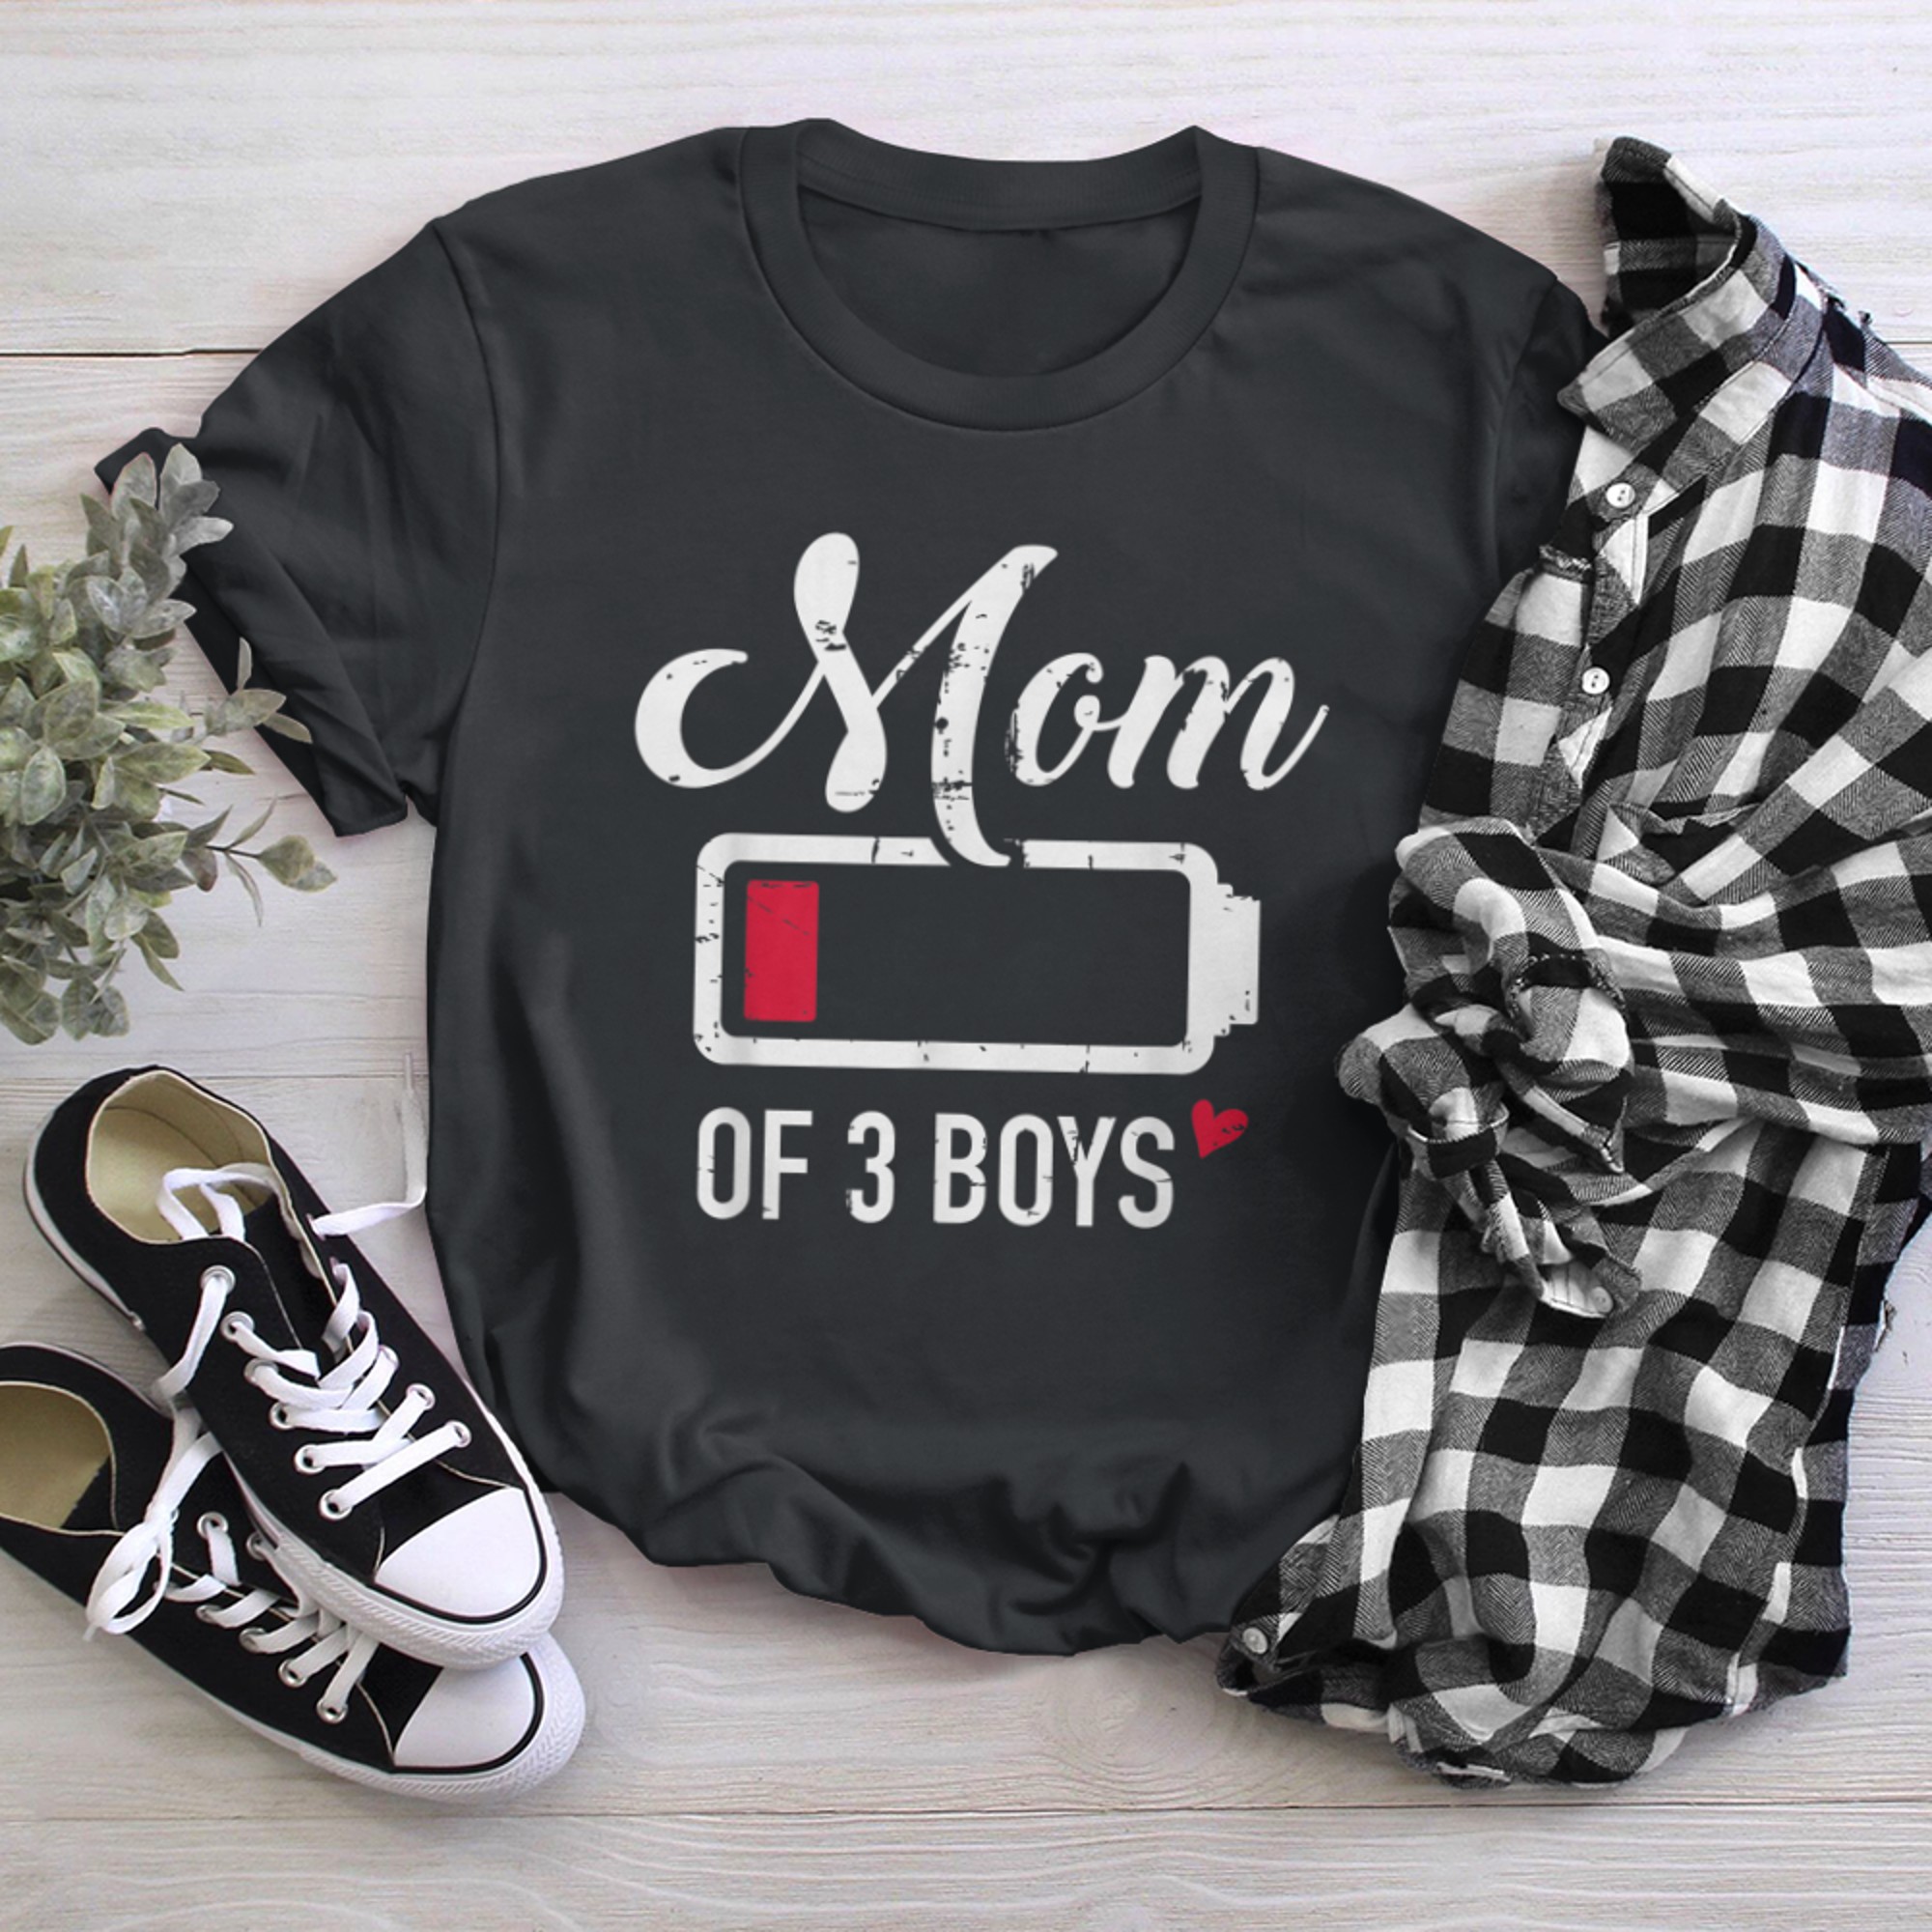 Mom of low battery (1) t-shirt black